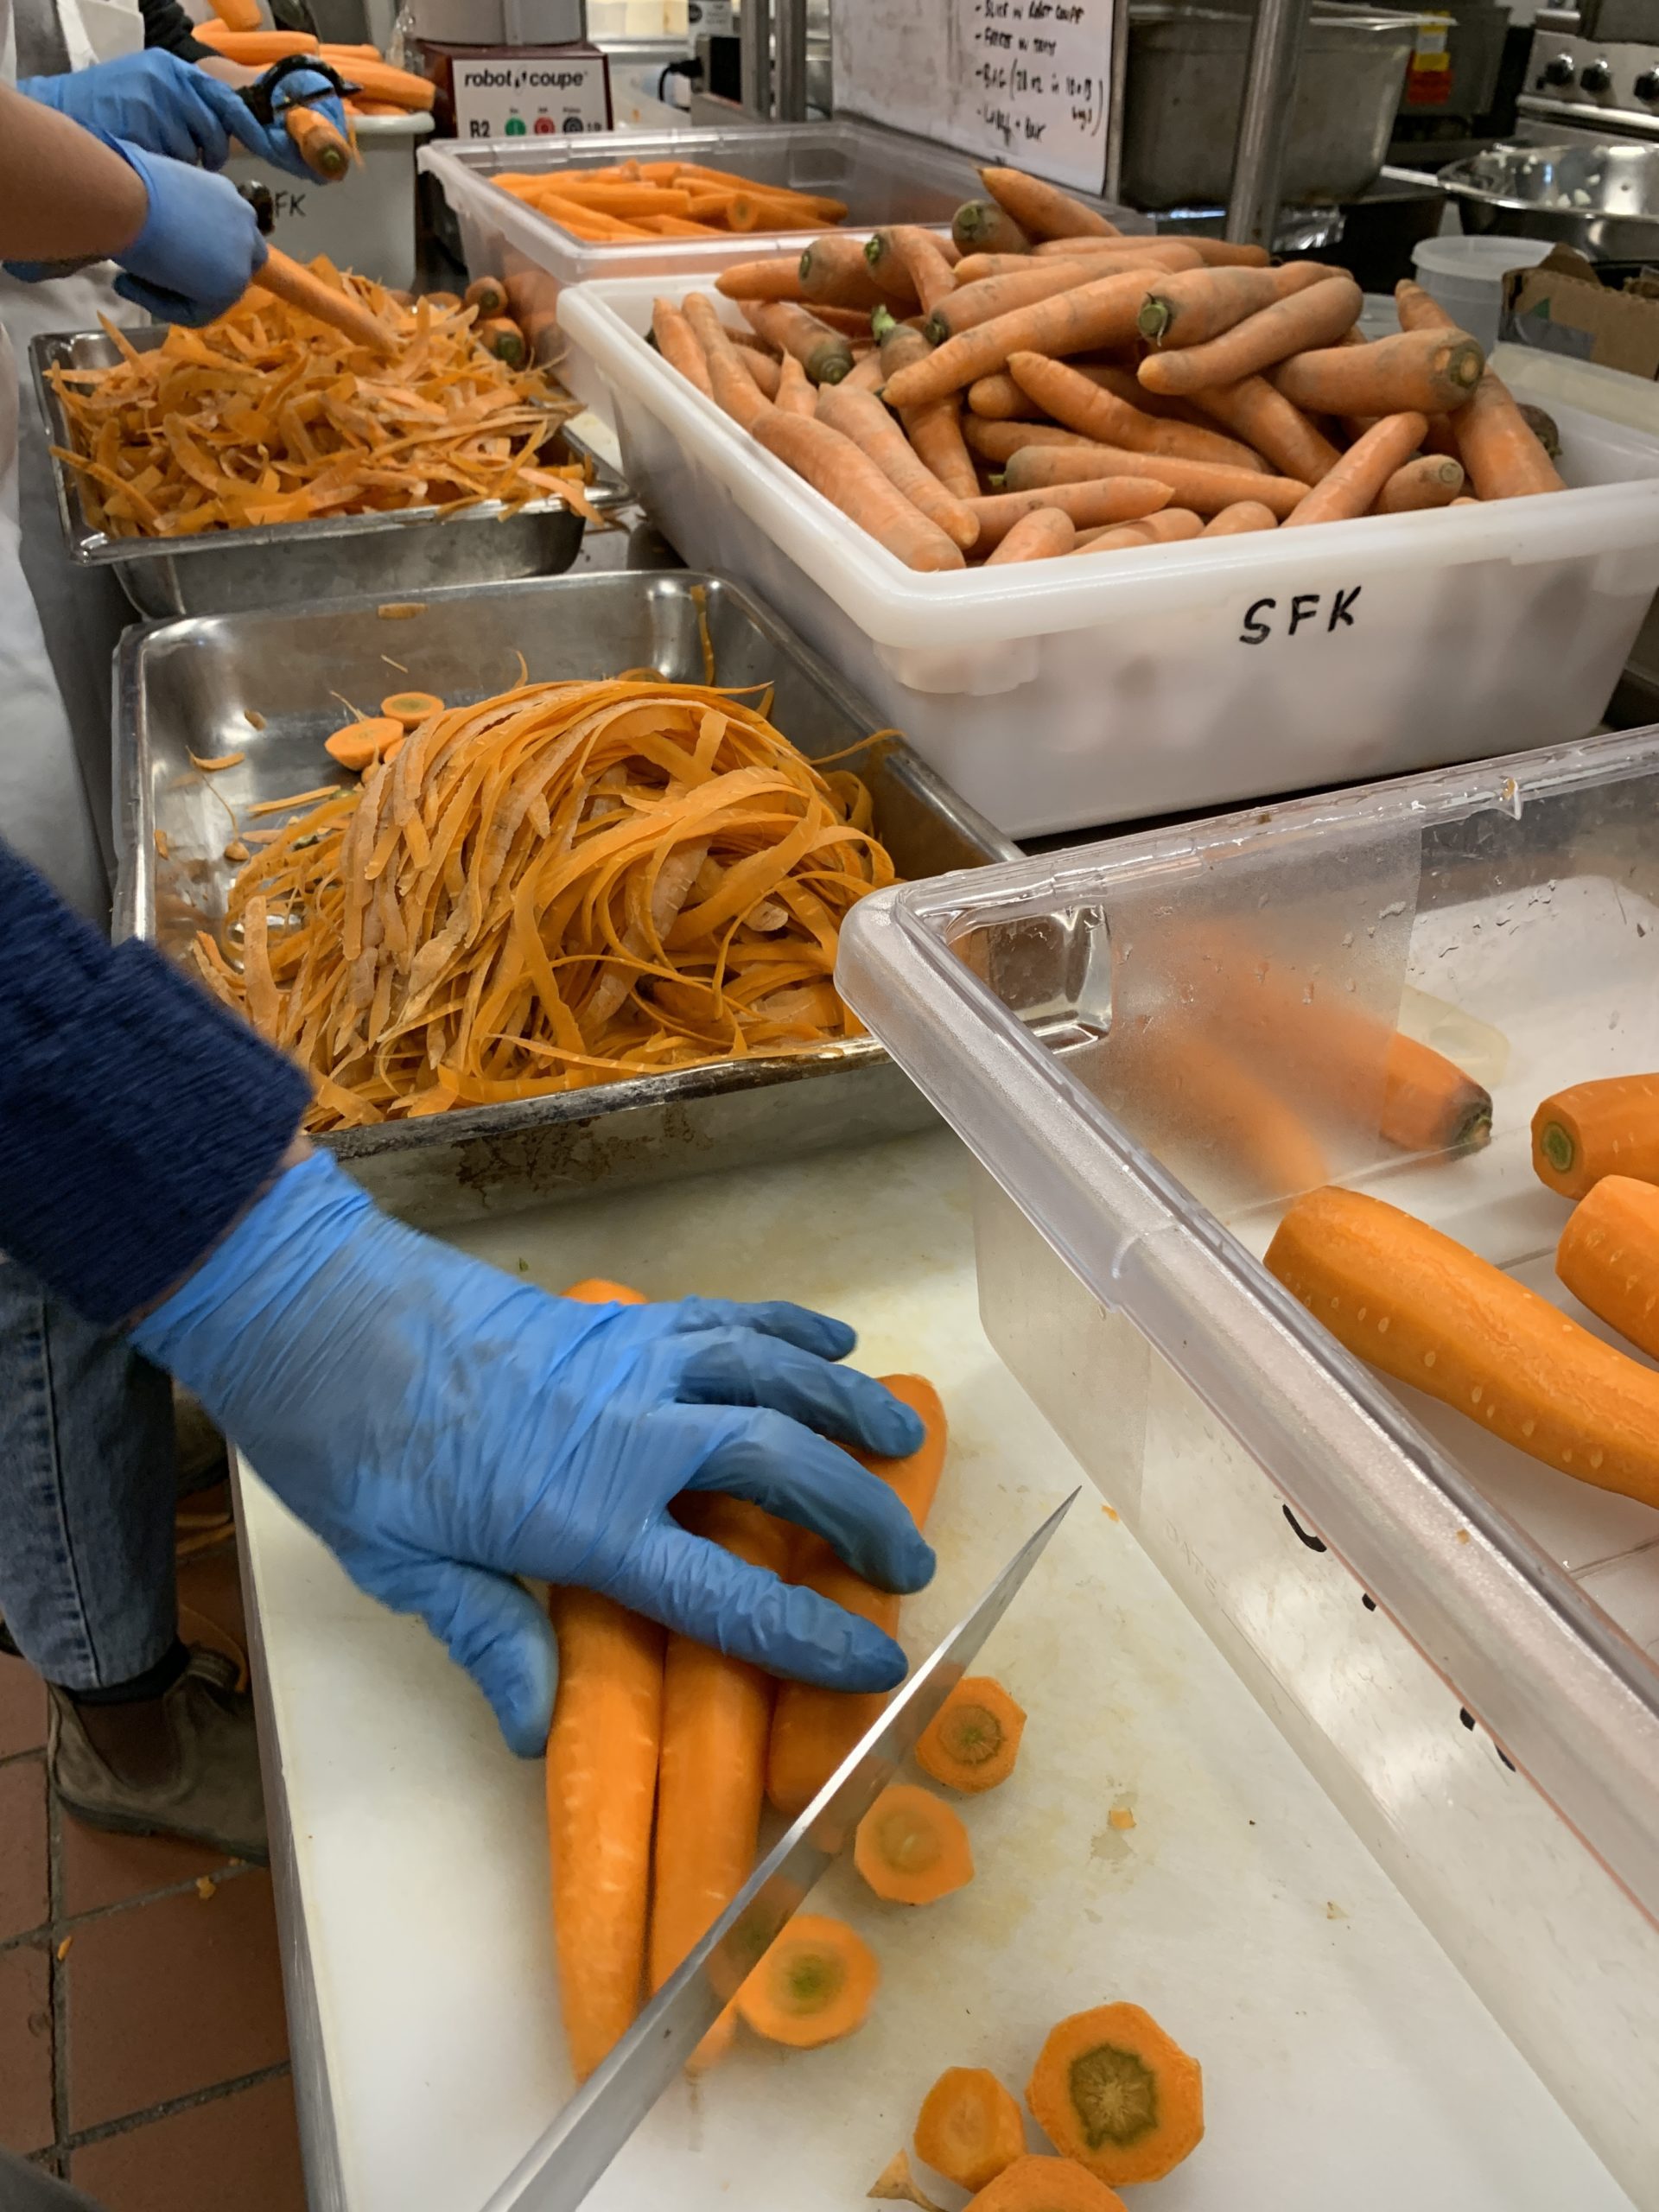 Volunteers helped wash, peel, chop and freeze 1,600 pounds of carrots to be sent to a food bank. KIM COVELL